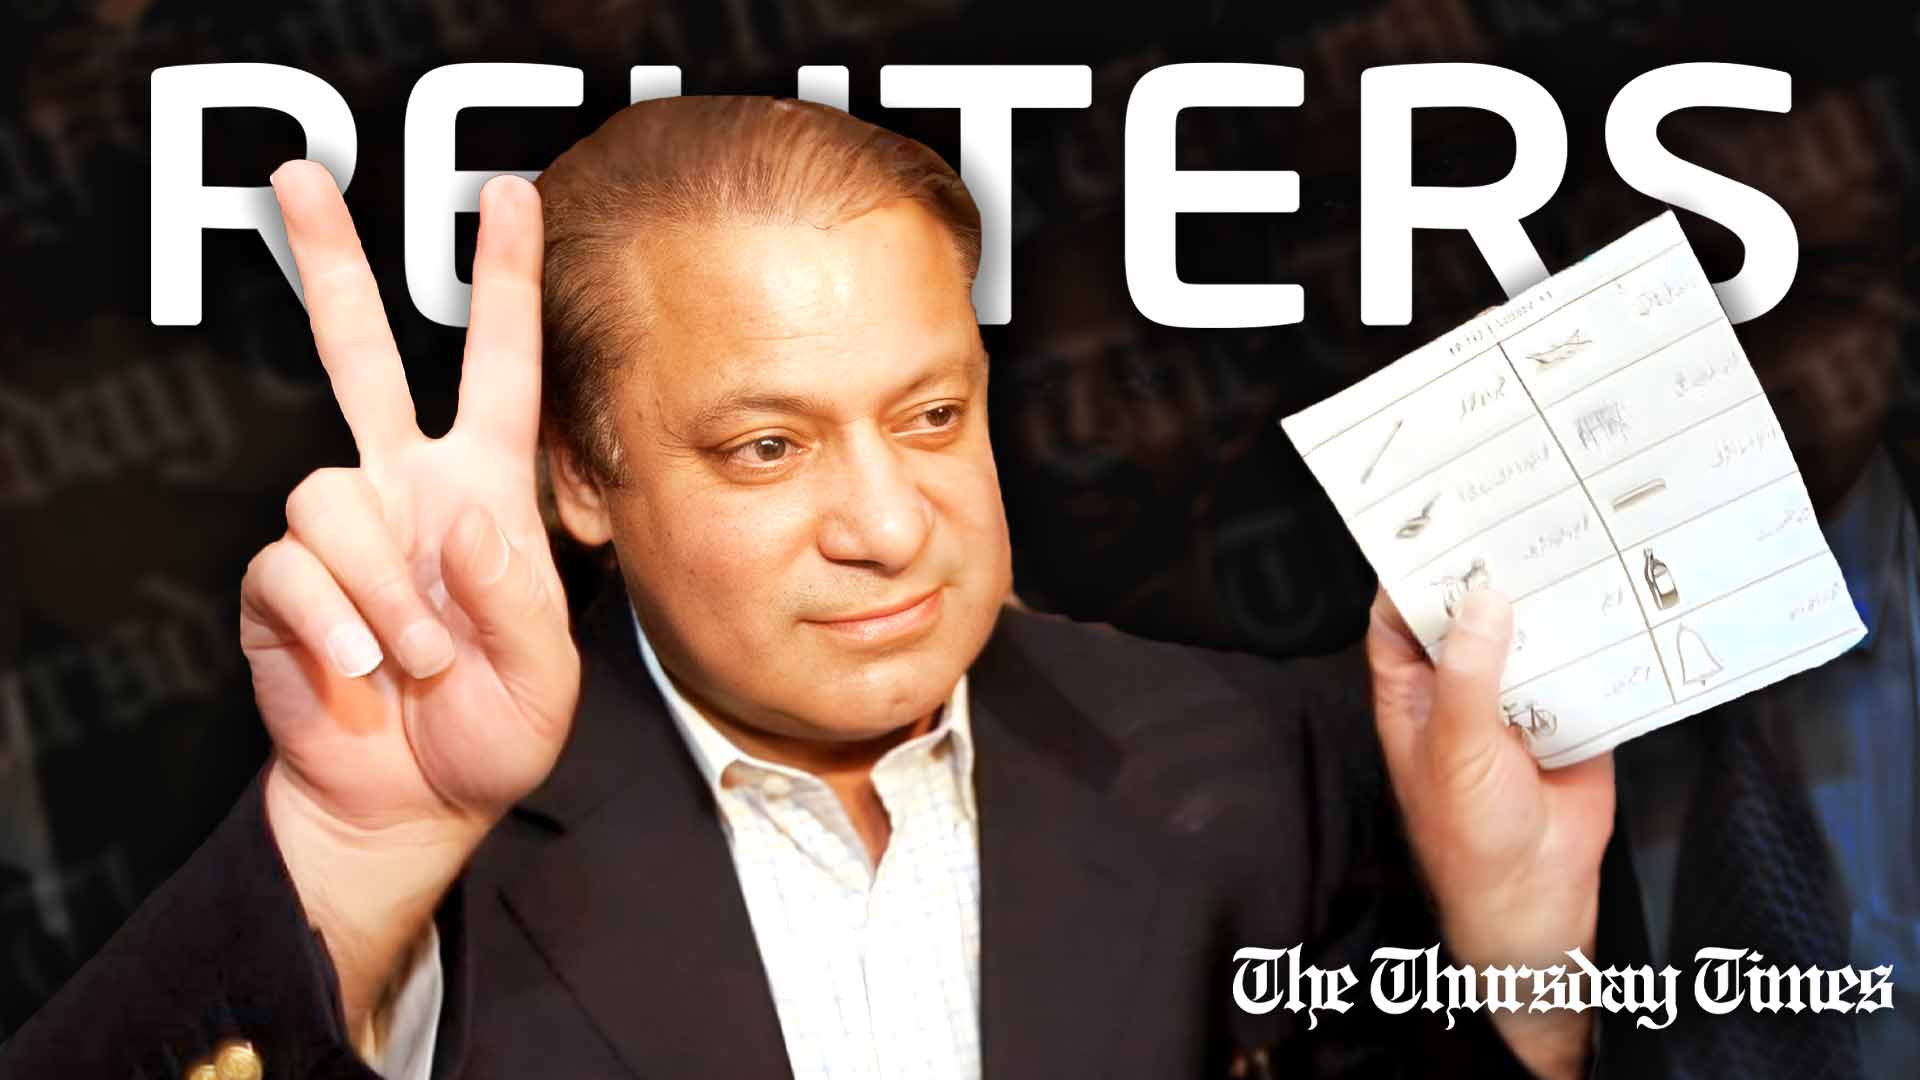 A file photo is shown of PML(N) supremo and former Pakistani prime minister Nawaz Sharif casting a vote at Lahore on February 18, 2008. — FILE/THE THURSDAY TIMES